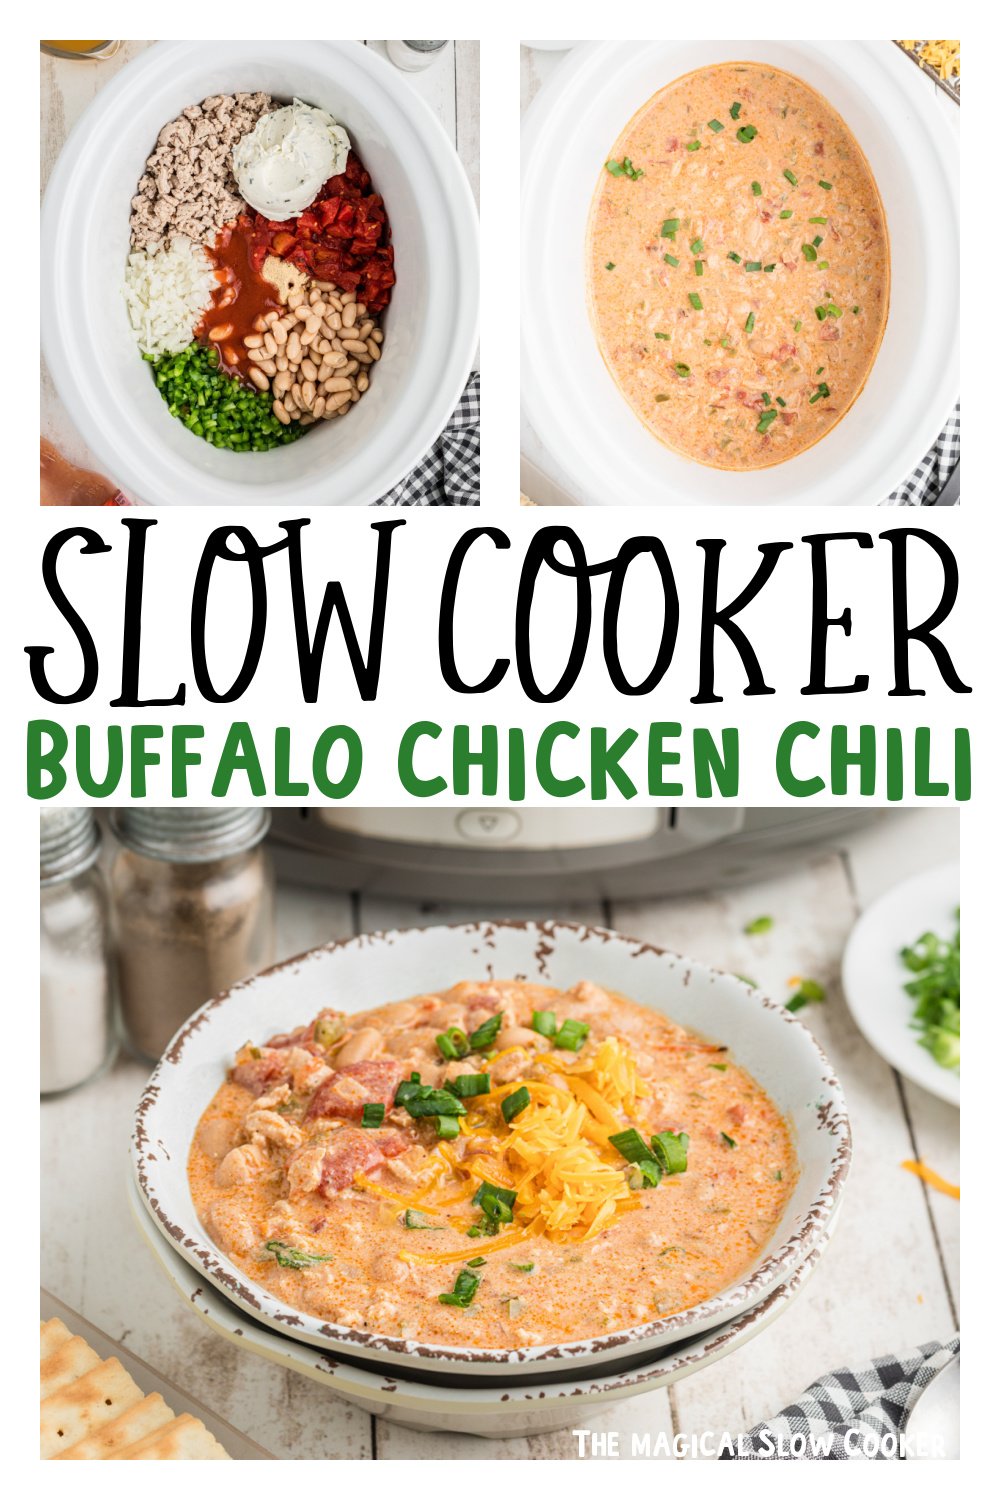 Slow Cooker Buffalo Chicken Chili - The Magical Slow Cooker